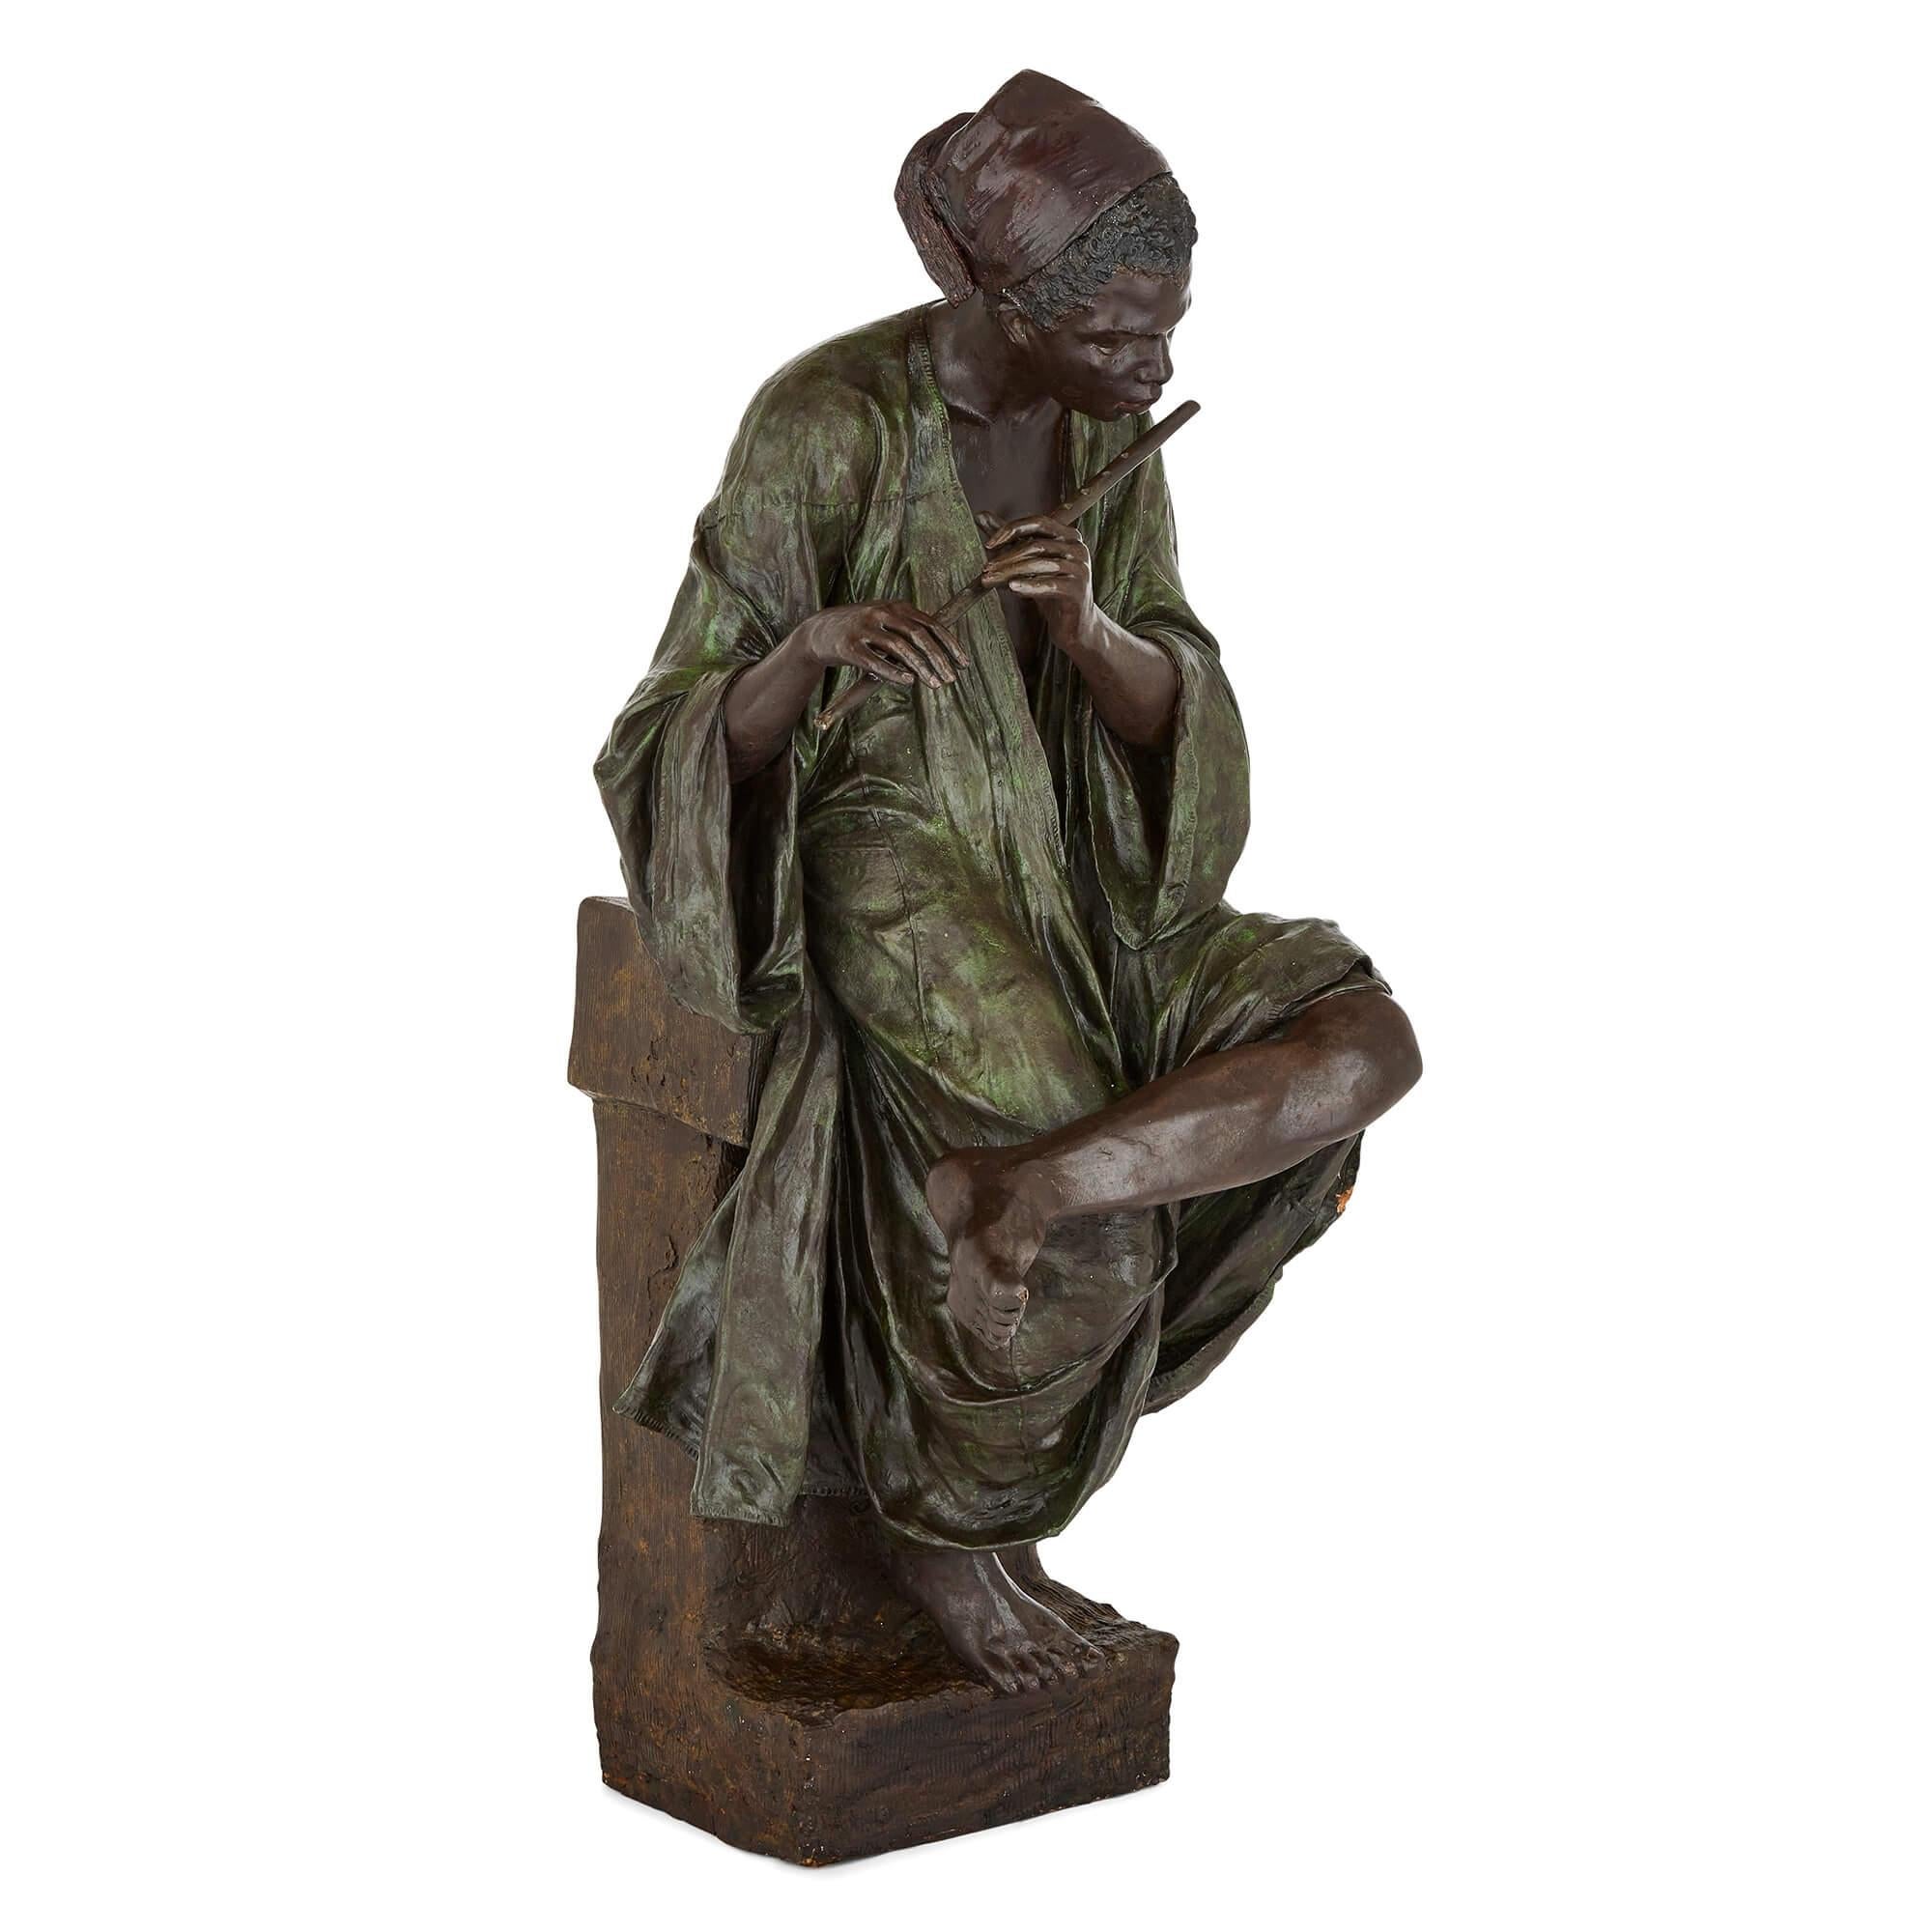 A large painted terracotta figure of a boy playing the flute by Goldscheider.
Austrian, c.1895
Measures: Height 115 cm, width 42 cm, depth 53 cm.

Marked 'Goldscheider / Reproduction Reservee,' this fine terracotta sculpture dates from around